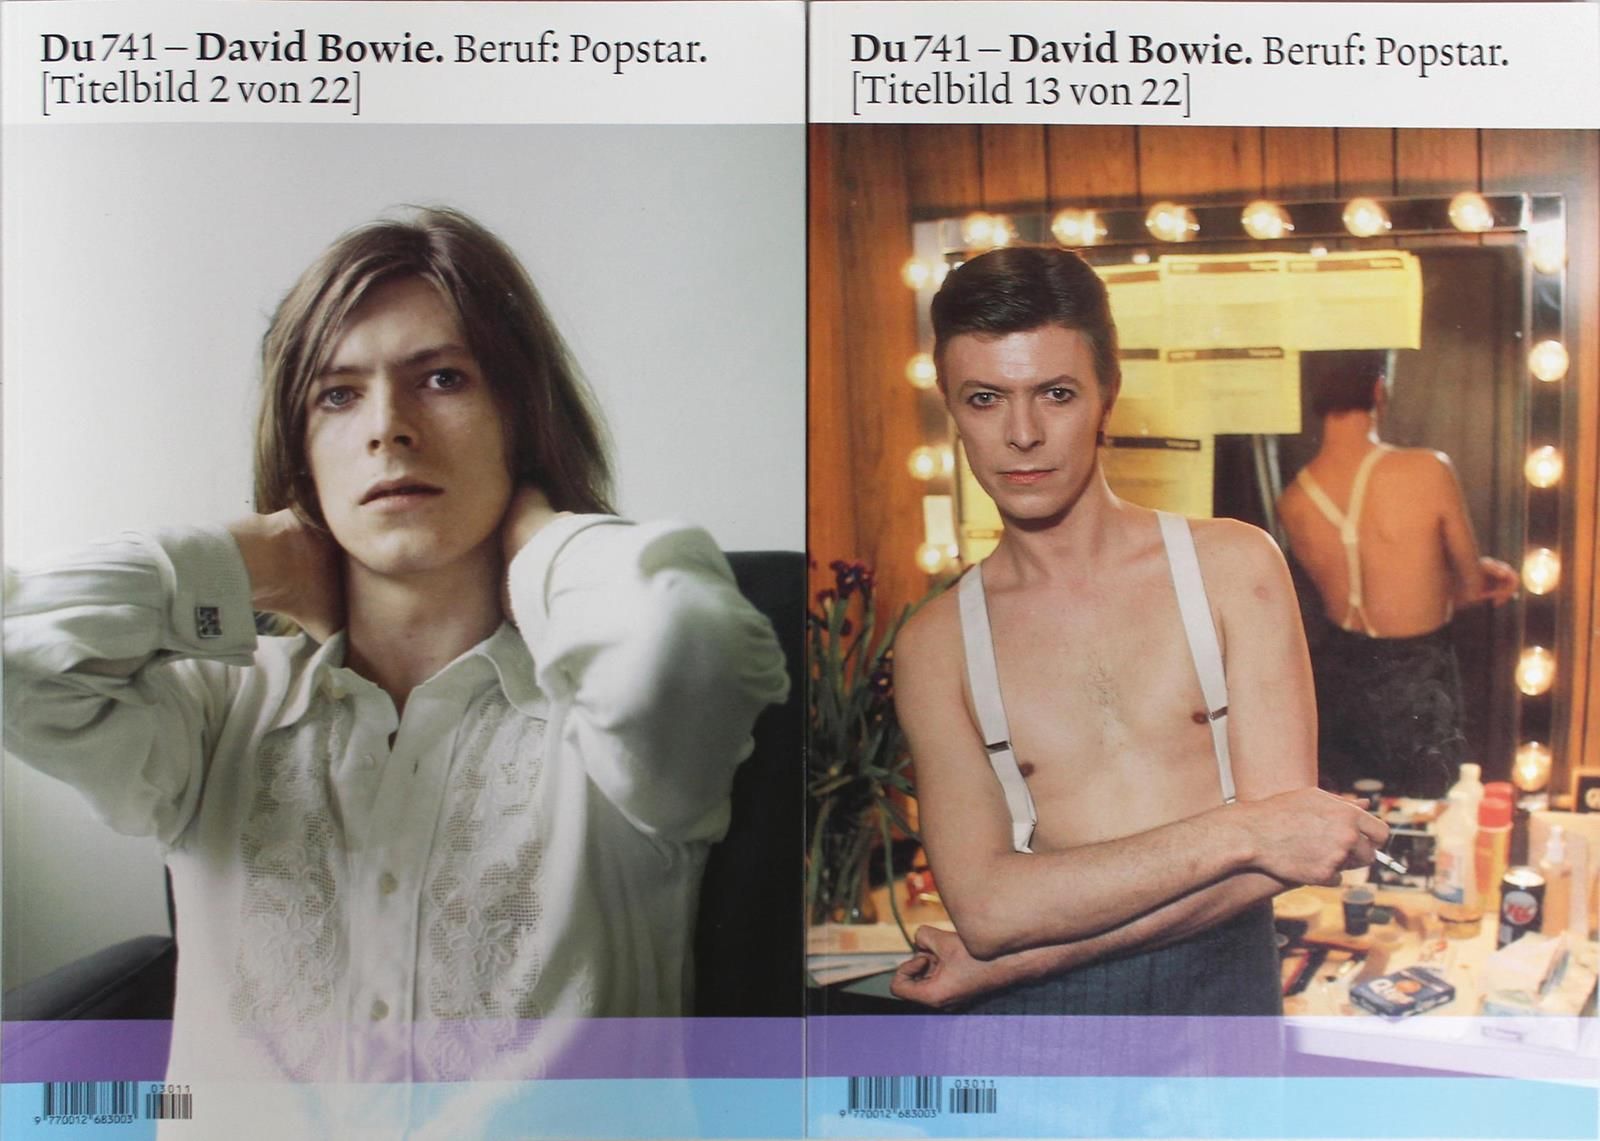 DU. No. 741 (special issue): David Bowie, Beruf Popstar. (Cover 1 to 22), togeth&hellip;